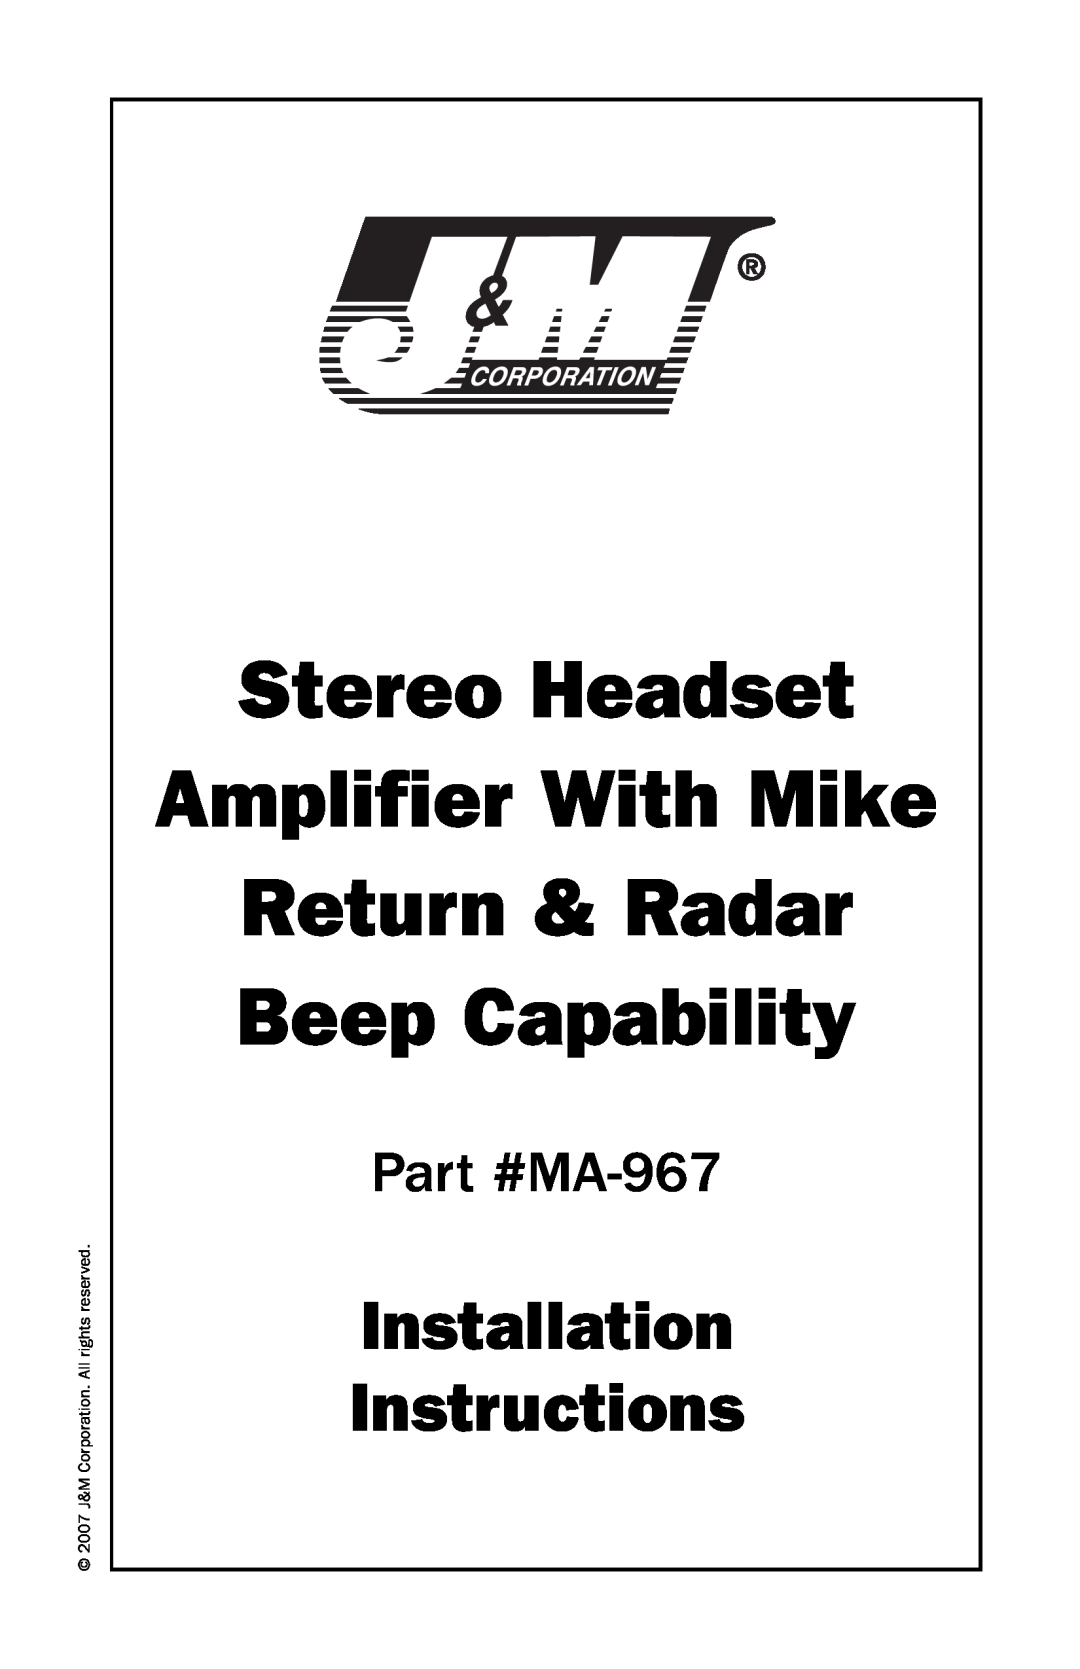 Nokia MA-967 installation instructions Stereo Headset Amplifier With Mike Return & Radar, Beep Capability 